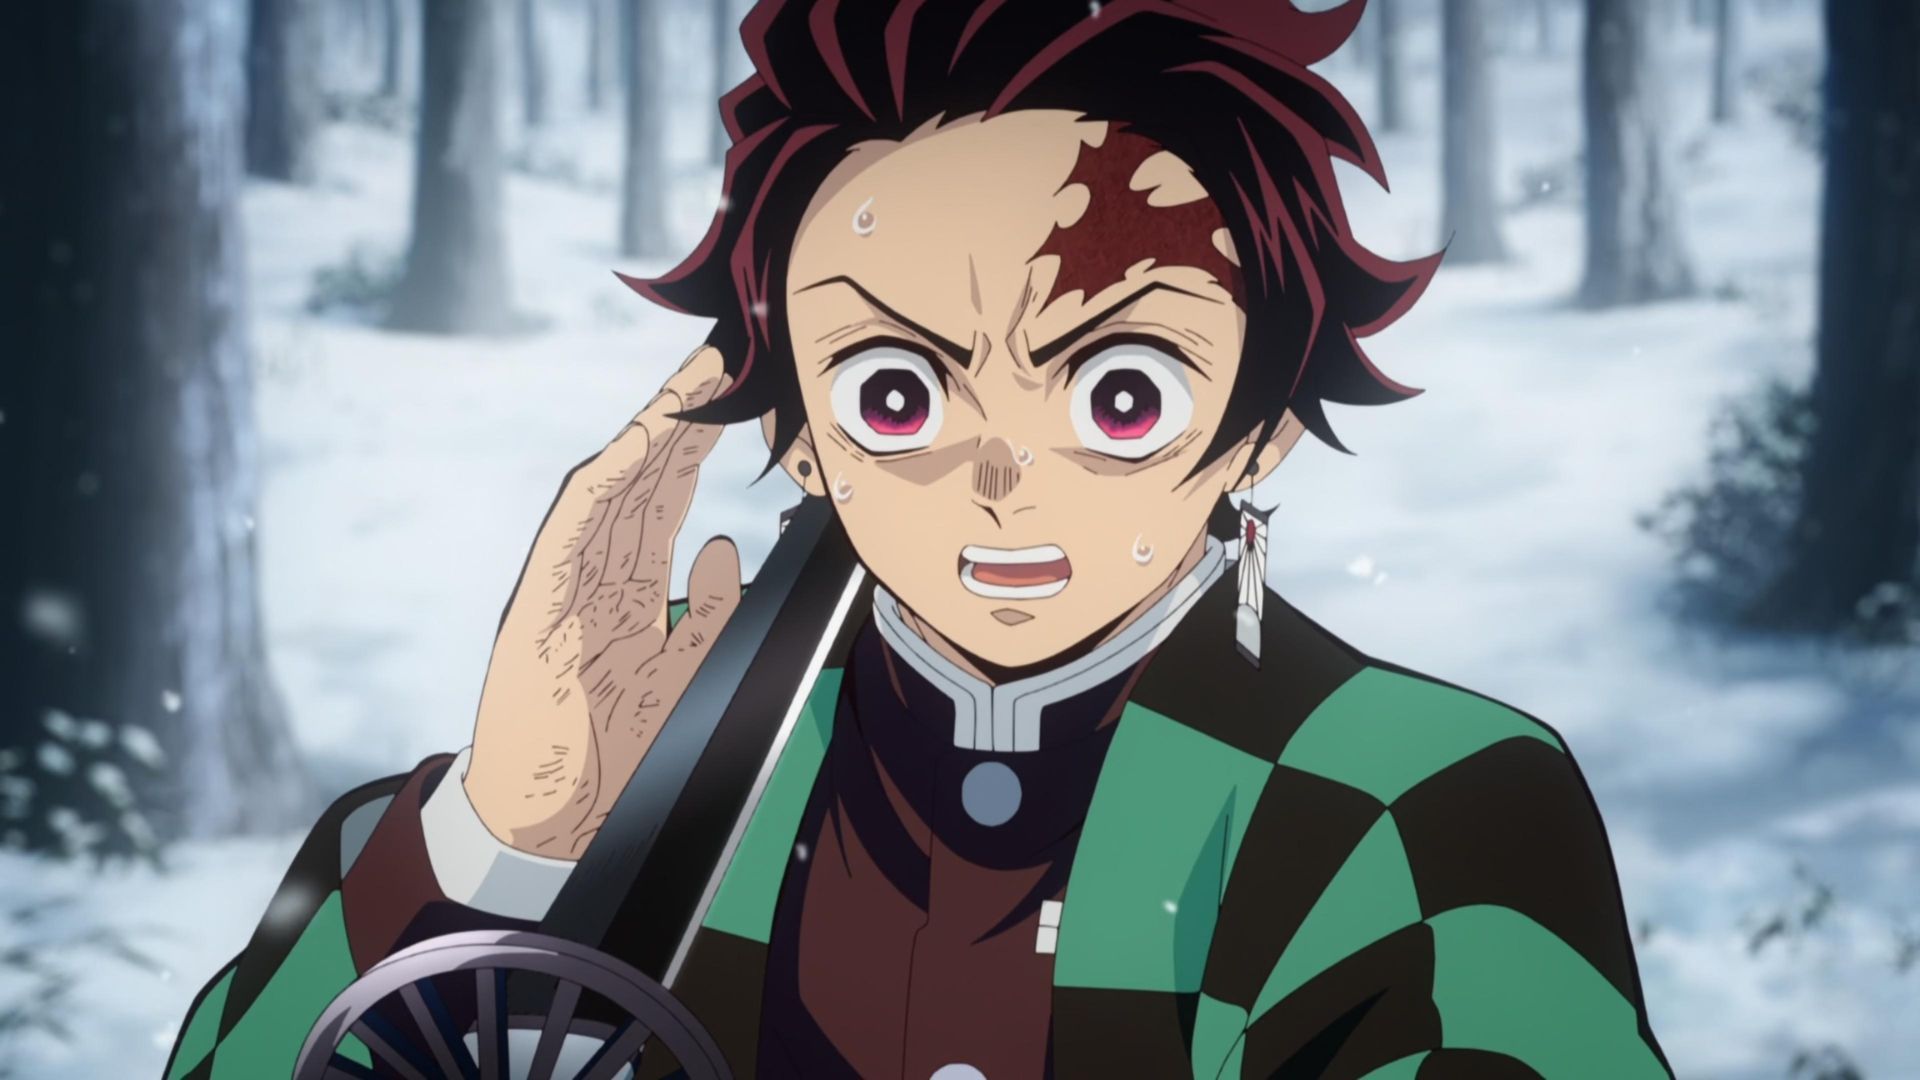 Demon Slayer Season 3 Episode 2: Release Date, Preview, and More